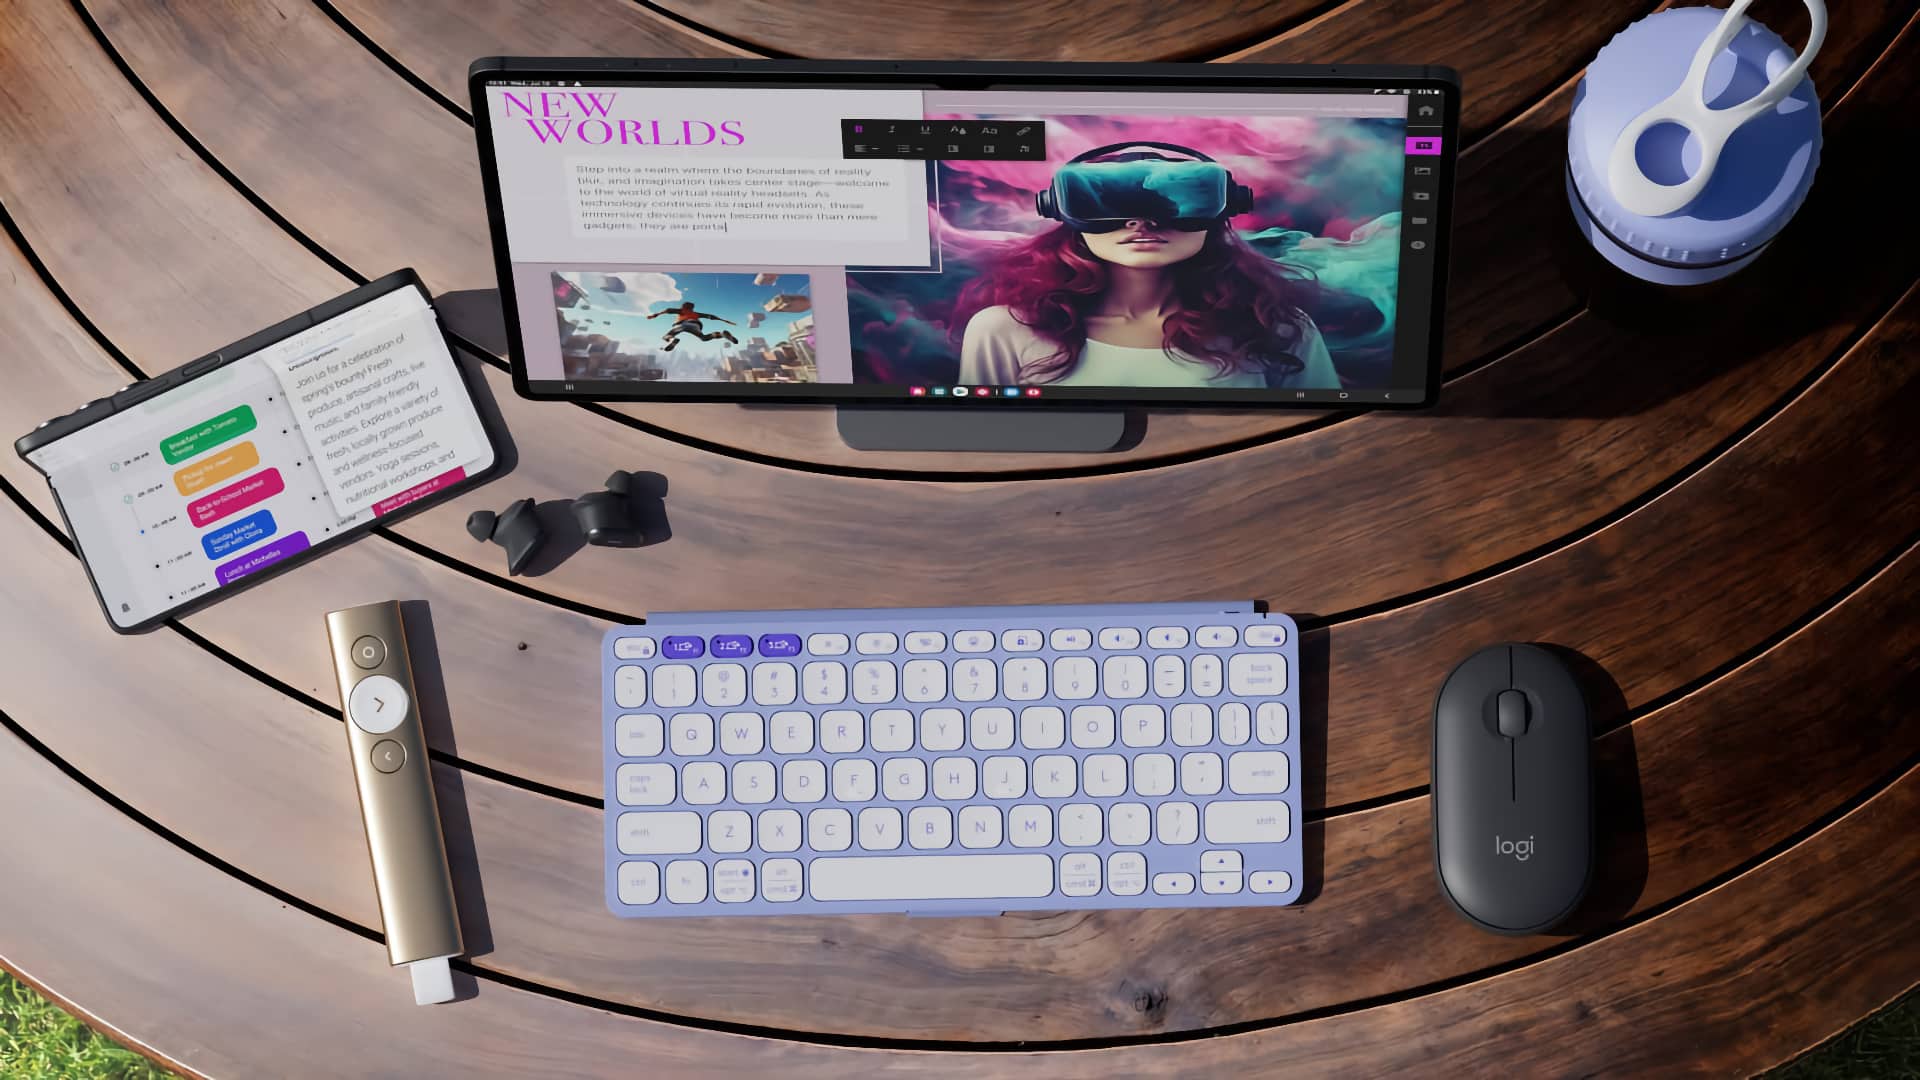 Top down view of a Logitech keyboard, an iPad Pro on a stand and a mouse on a wooden dsk